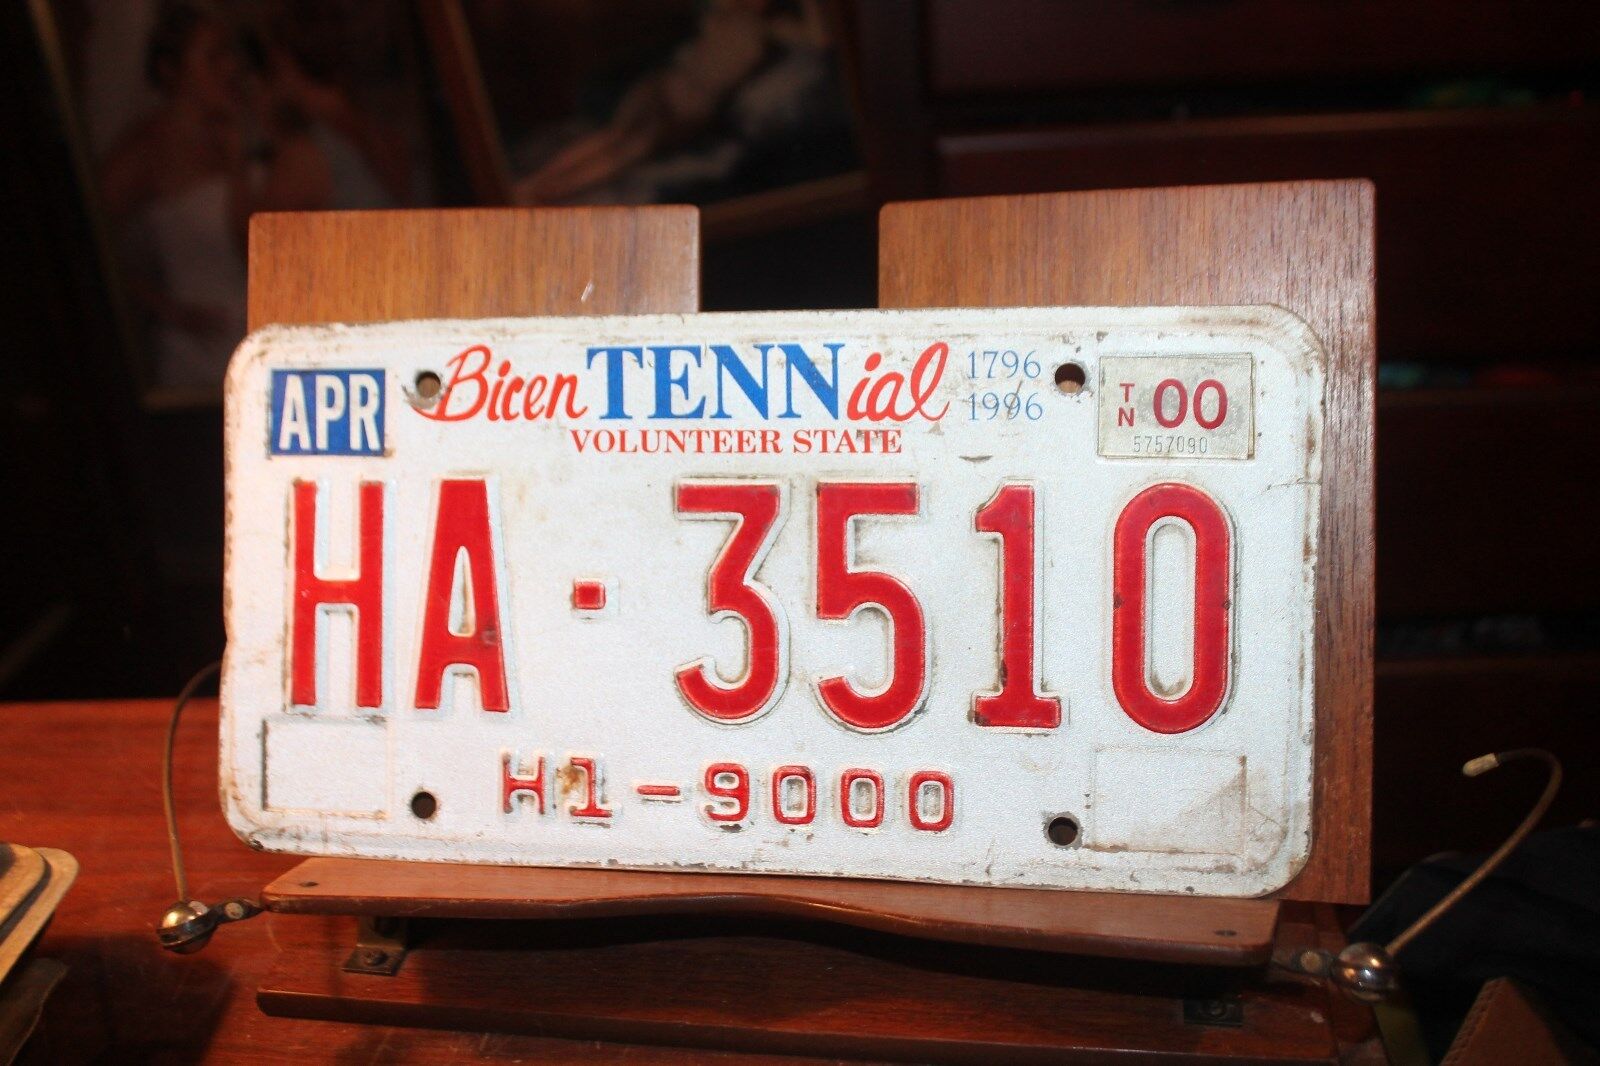 2000 Tennessee License Plate Commercial H1-9000 HA-3510 BicenTENNial